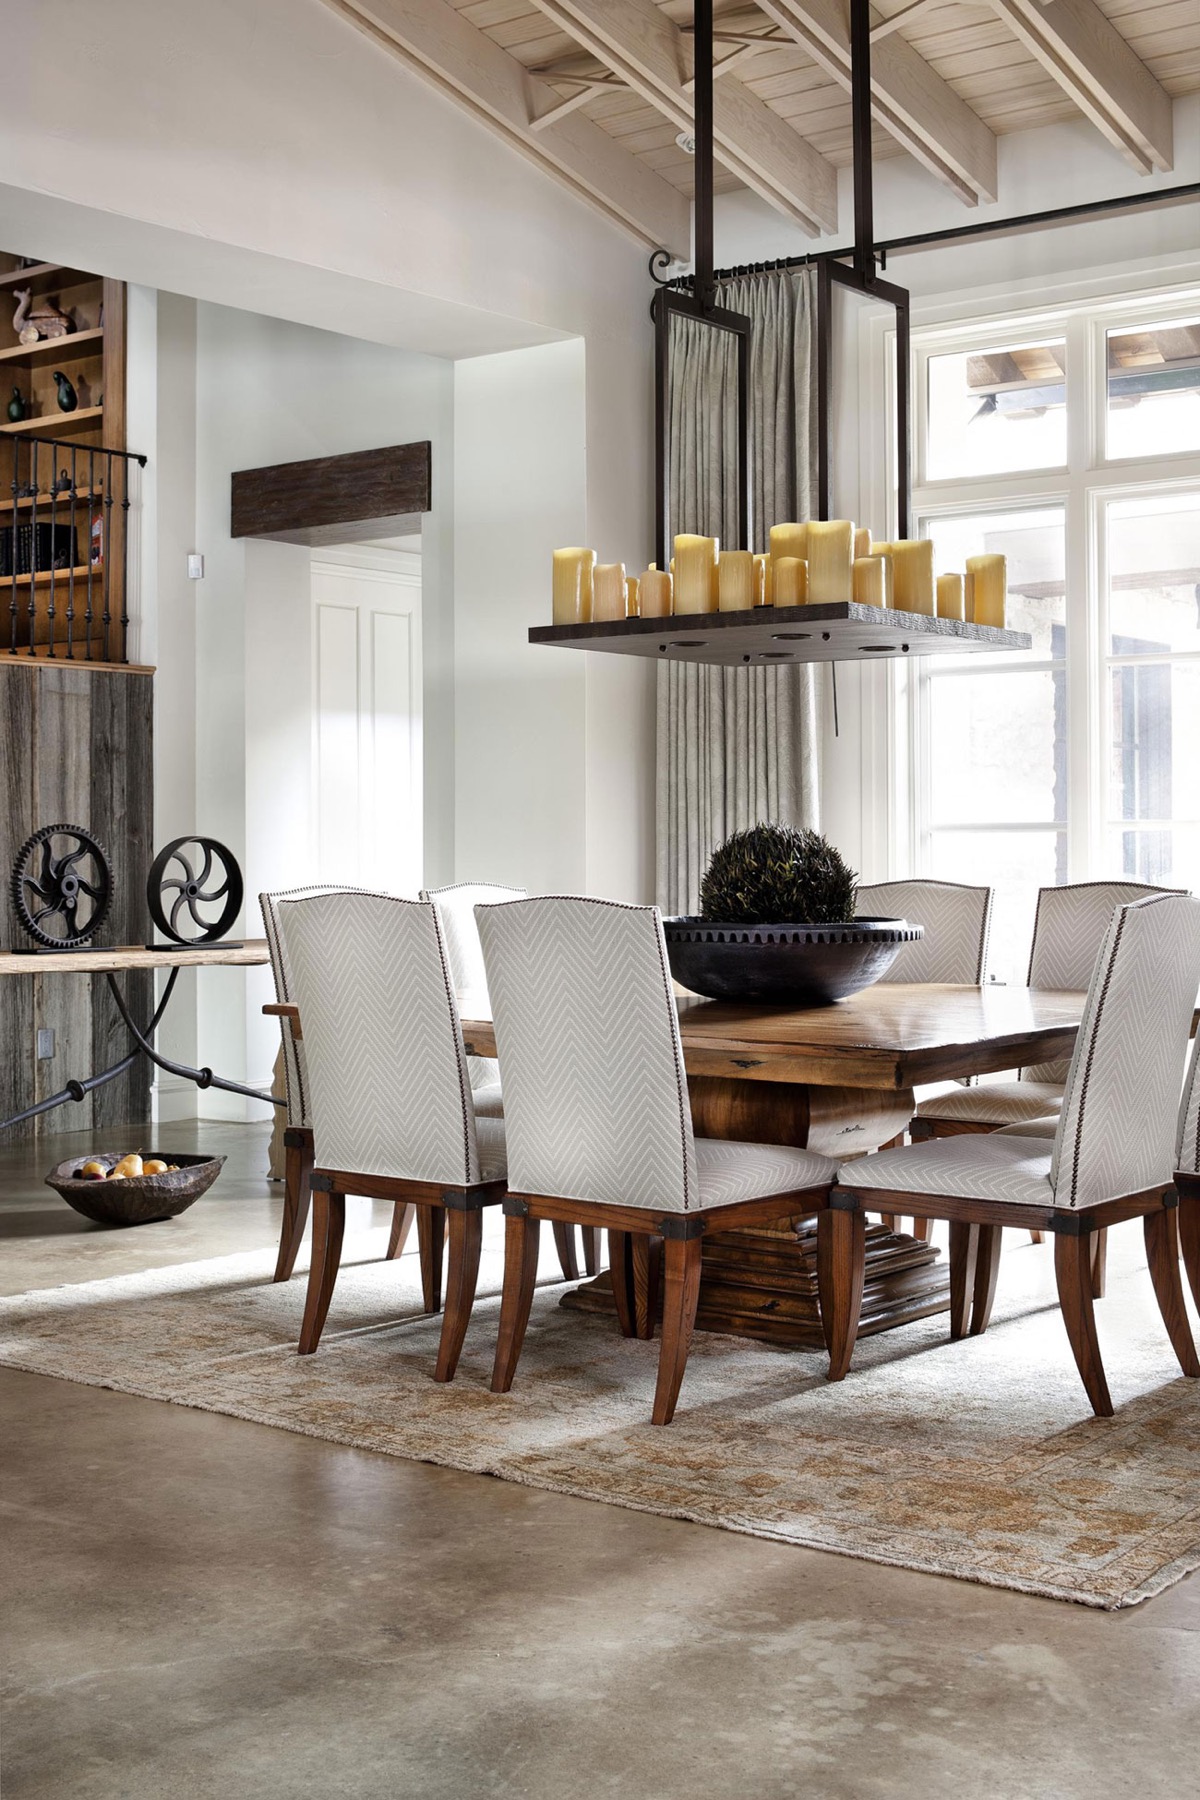 Rustic Dining Rooms That Radiate Refinement, Rustic Modern Dining Room Table And Chairs